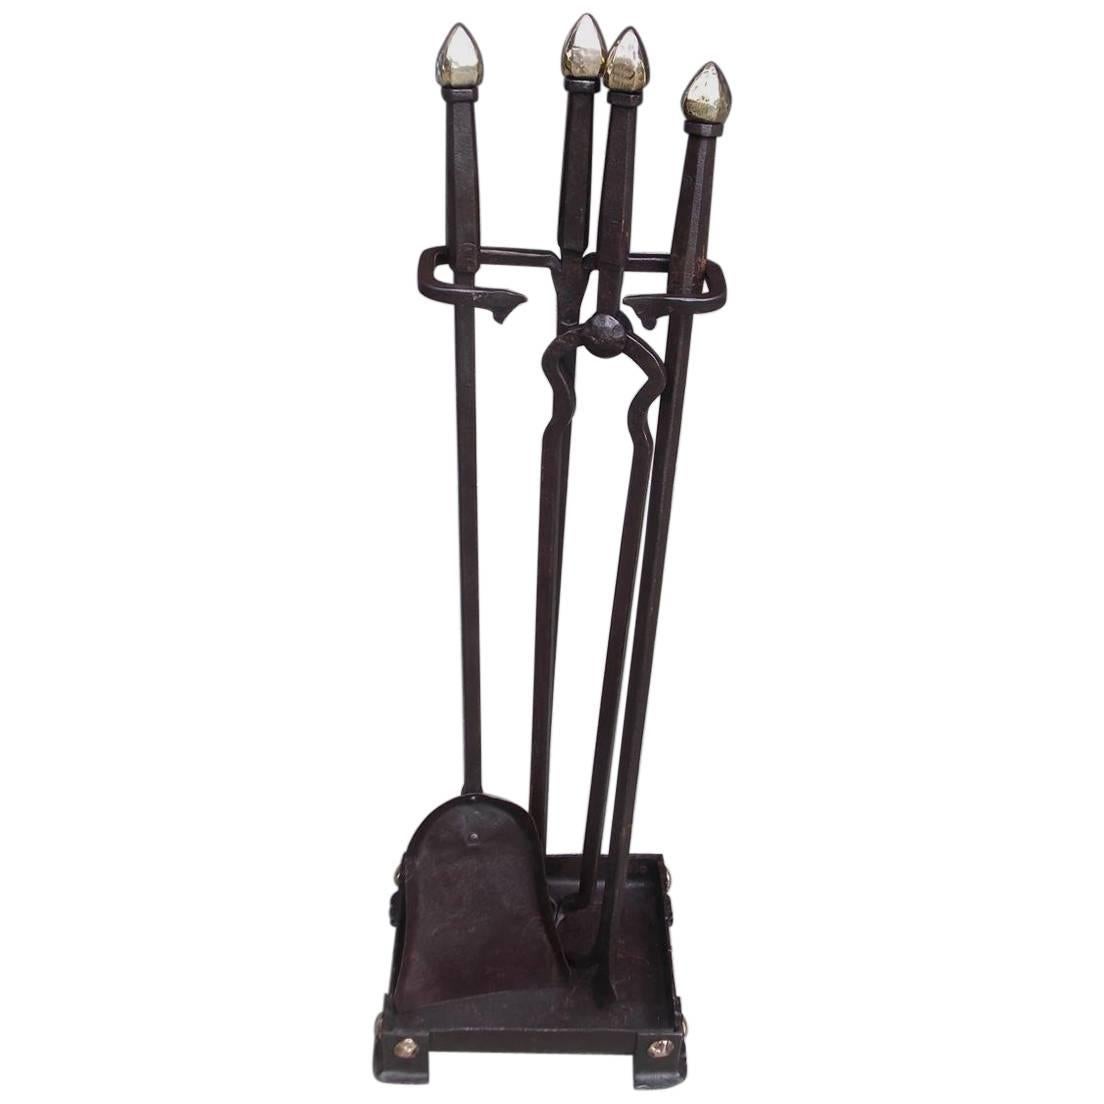 American Wrought Iron & Brass Faceted Arrow Finial Fire Tools on Stand, C. 1850